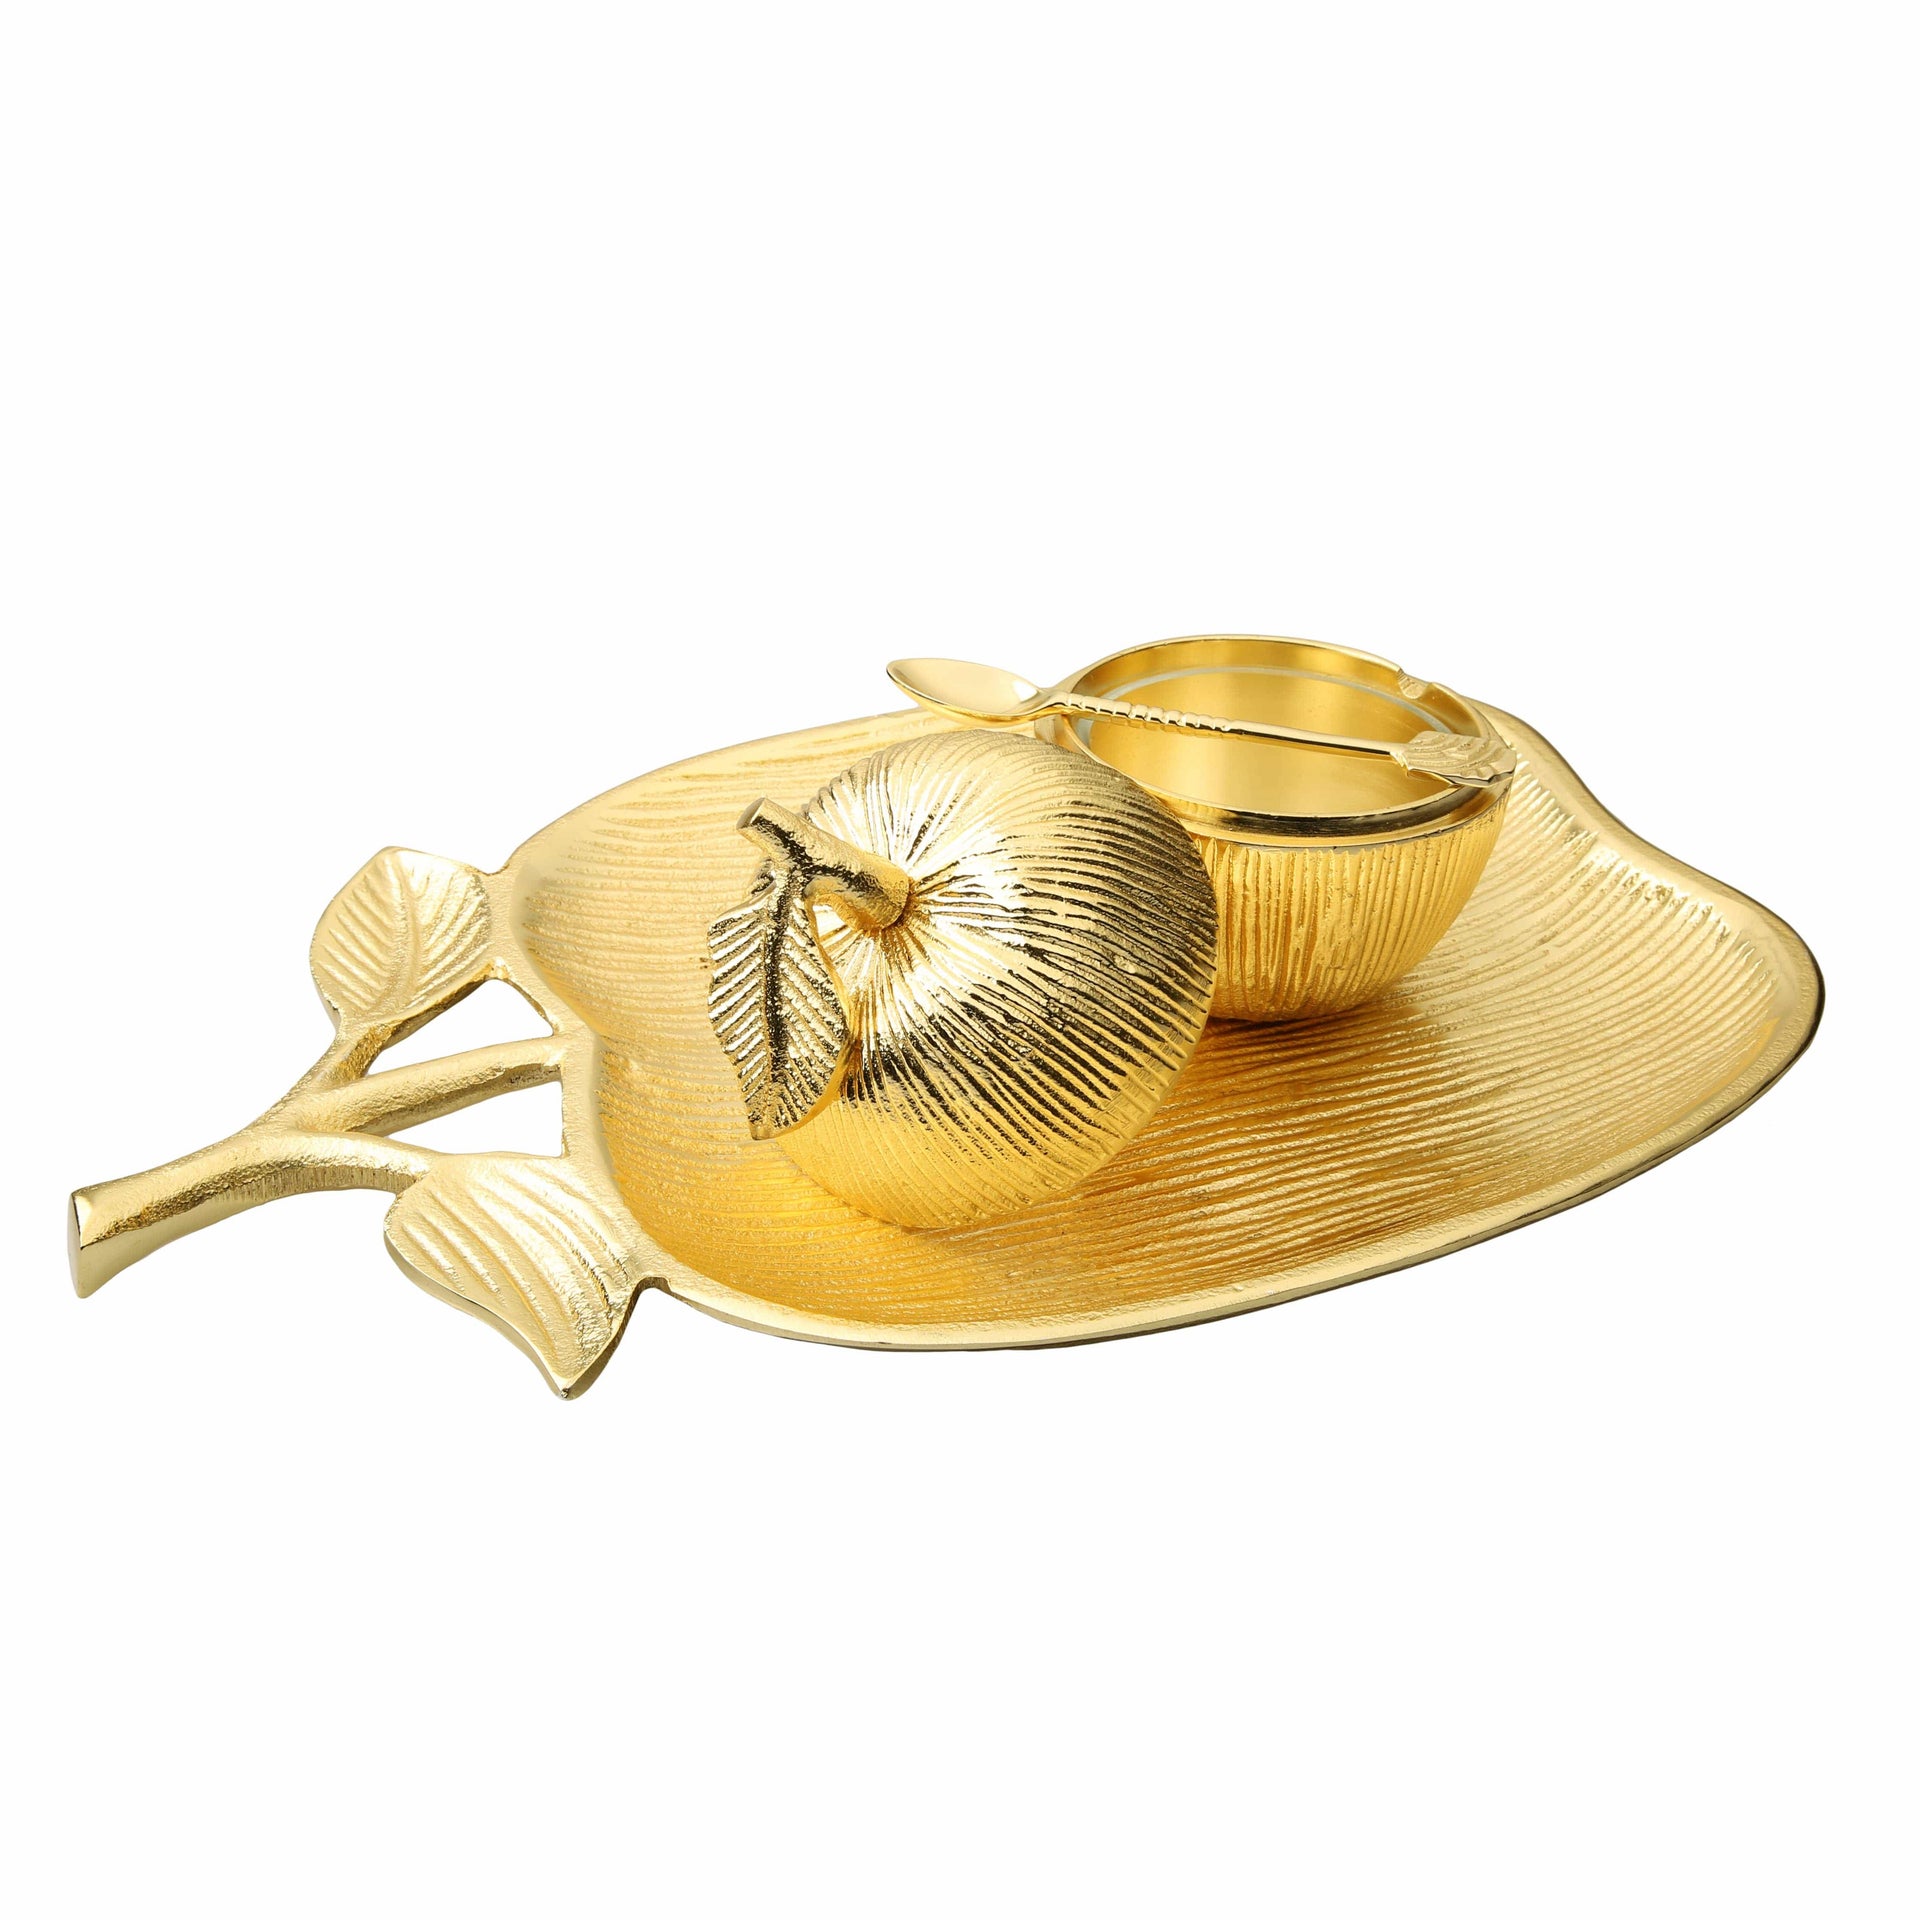 Classic Touch Decor Honey Dishes Large Apple Shaped Dish with Removable Honey Jar - Gold